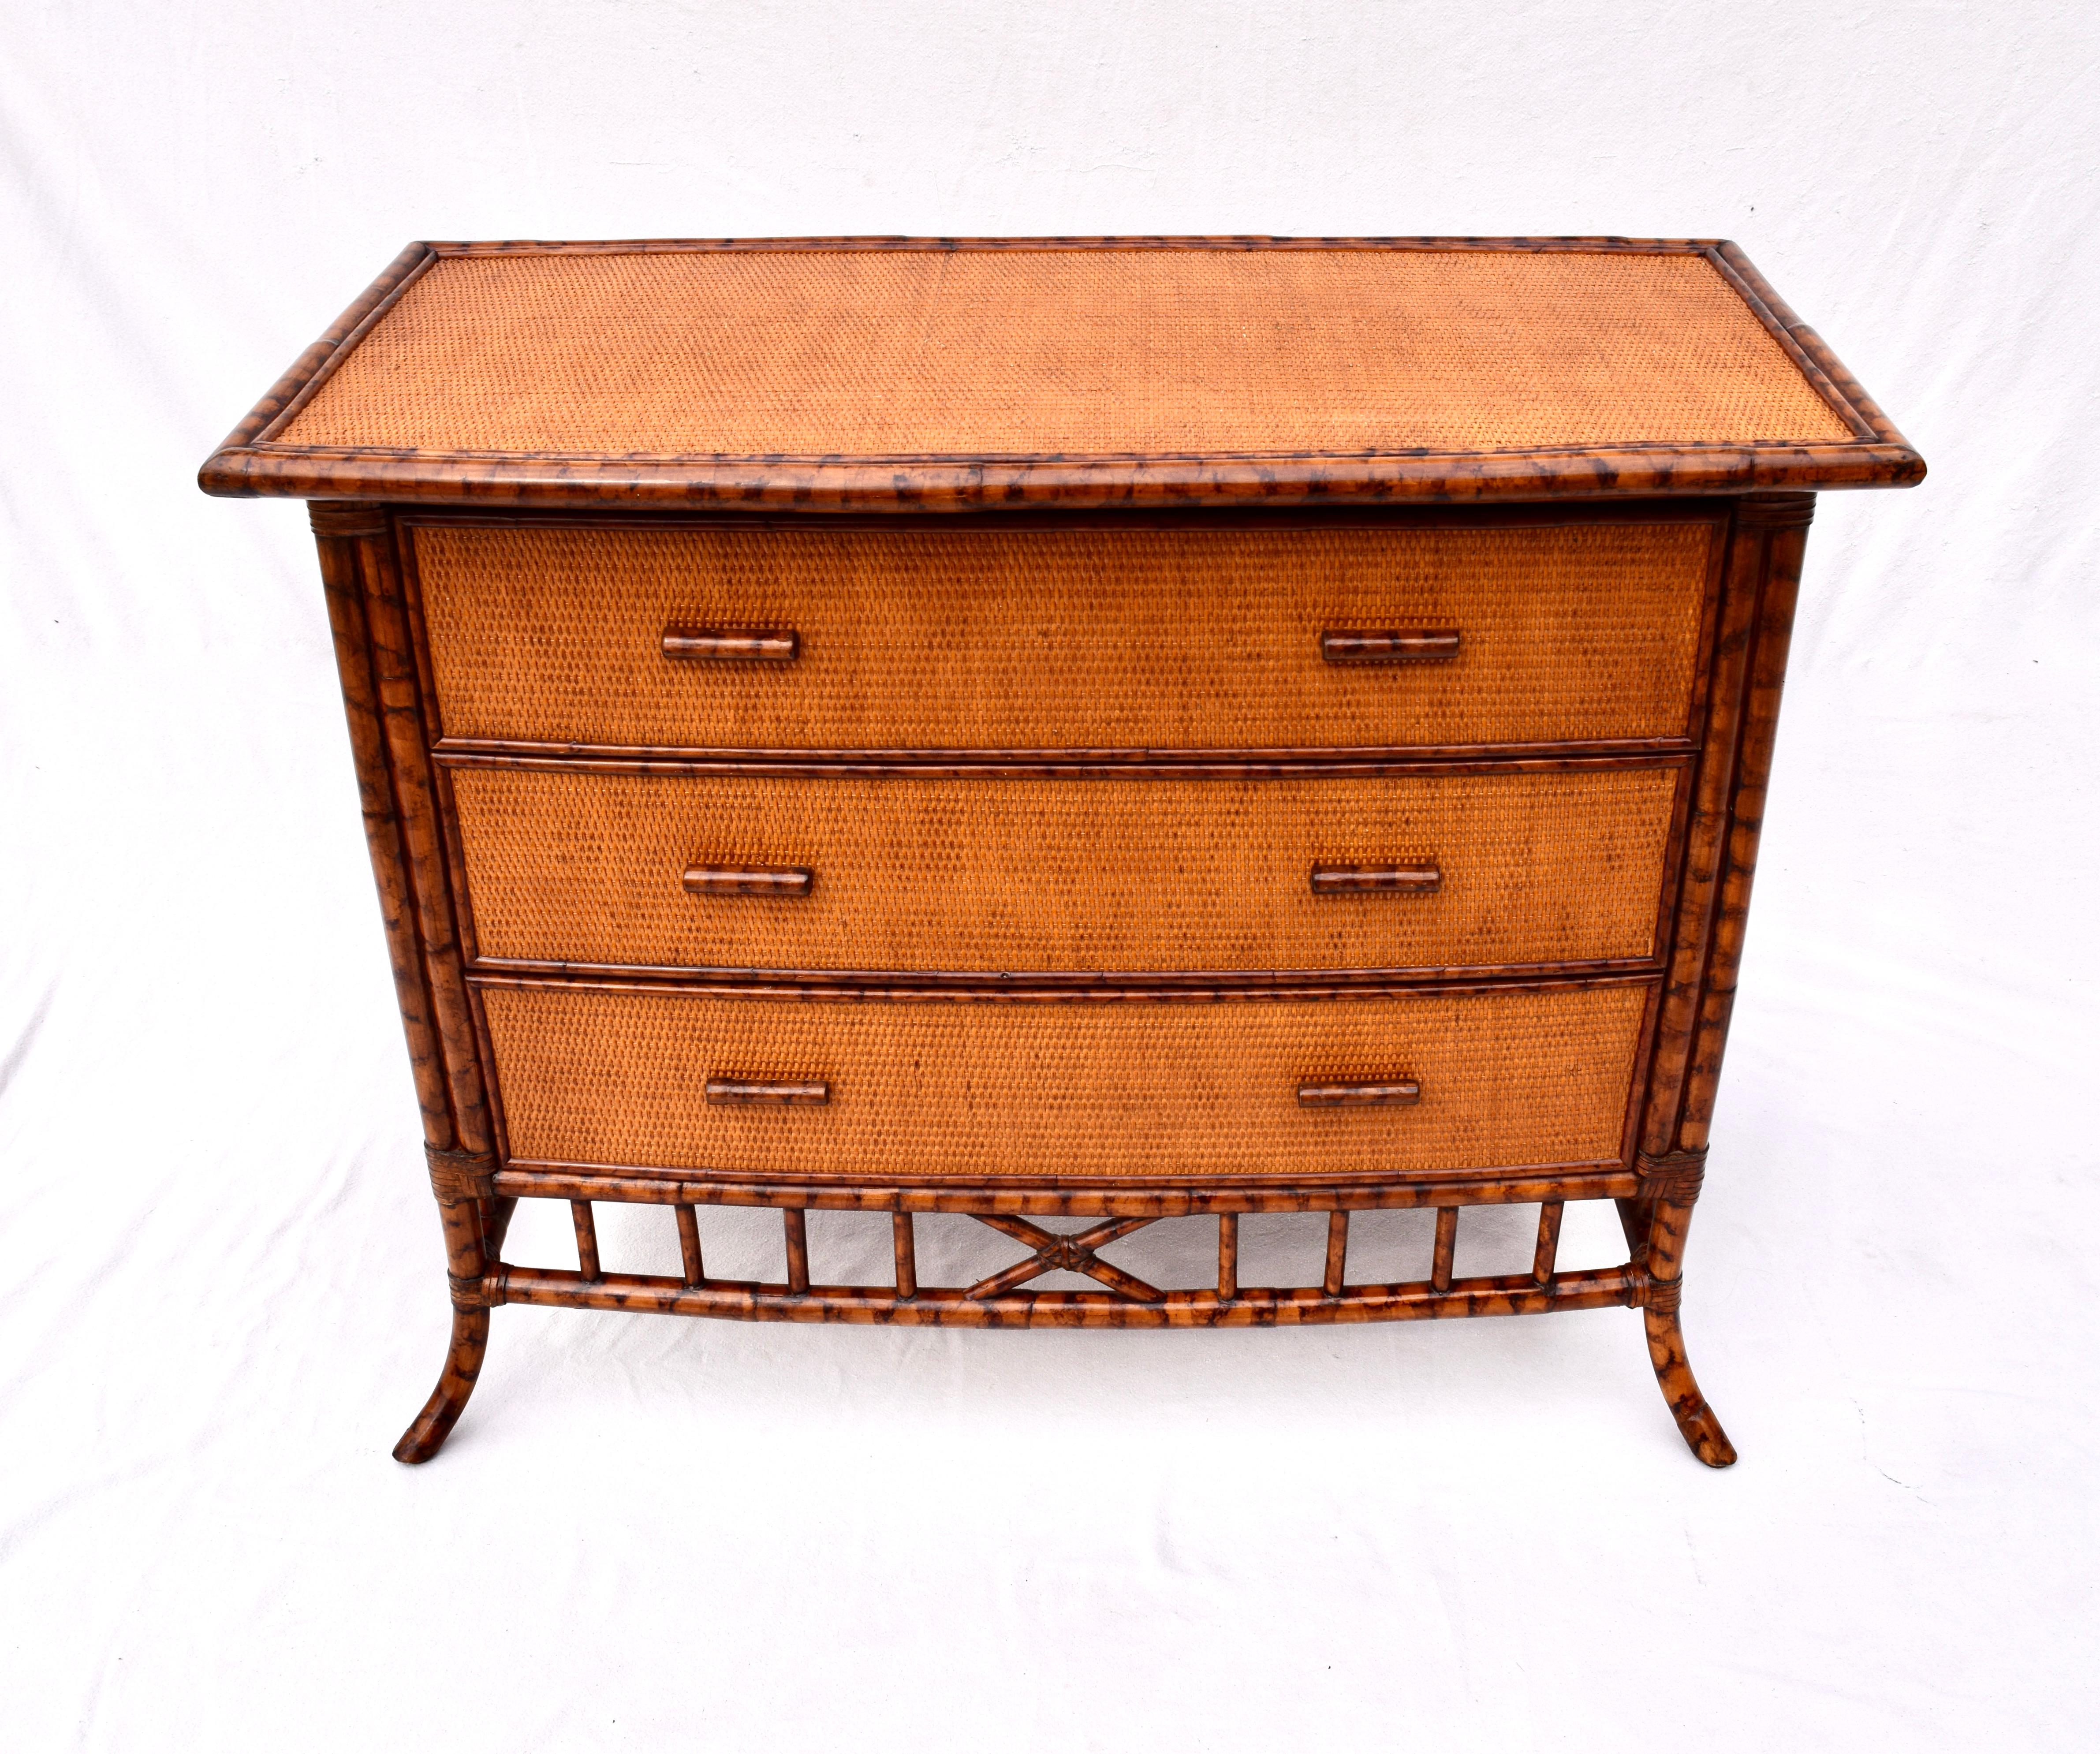 A tortoise or burnt bamboo grass cloth chest of three drawers with old world X-base and splay leg styling after British Colonial furniture of the 19th century. An especially solid chest secured in rawhide leather joinery in rarely used